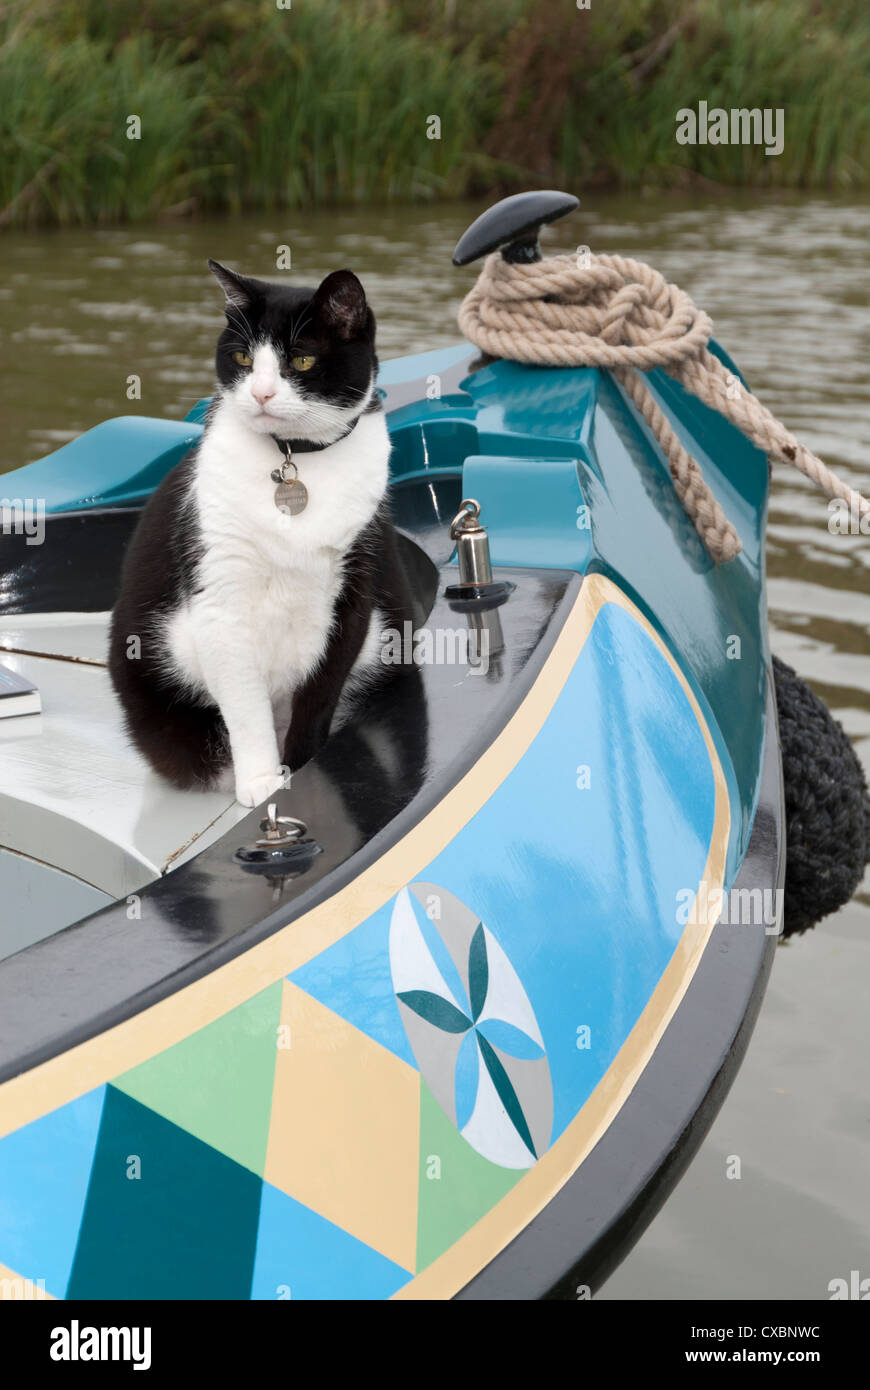 Black and white pet cat sitting on bow of traditional narrowboat, England, Great Britain, United Kingdom, Europe Stock Photo